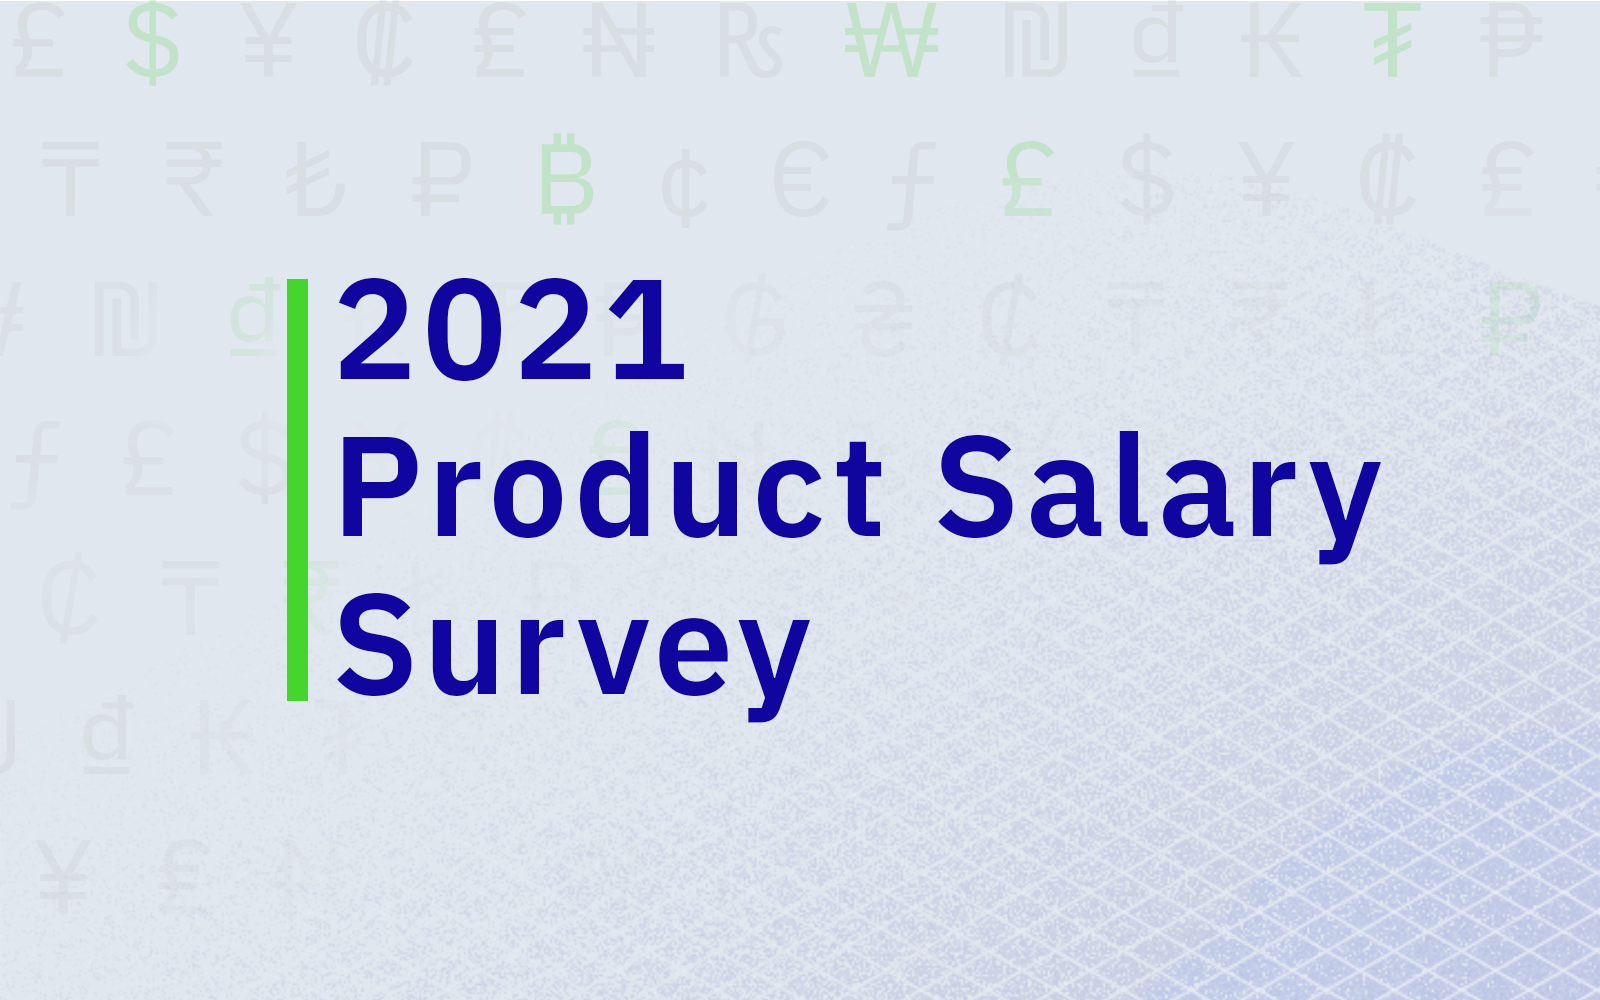 Take the 2021 Product Salary Survey